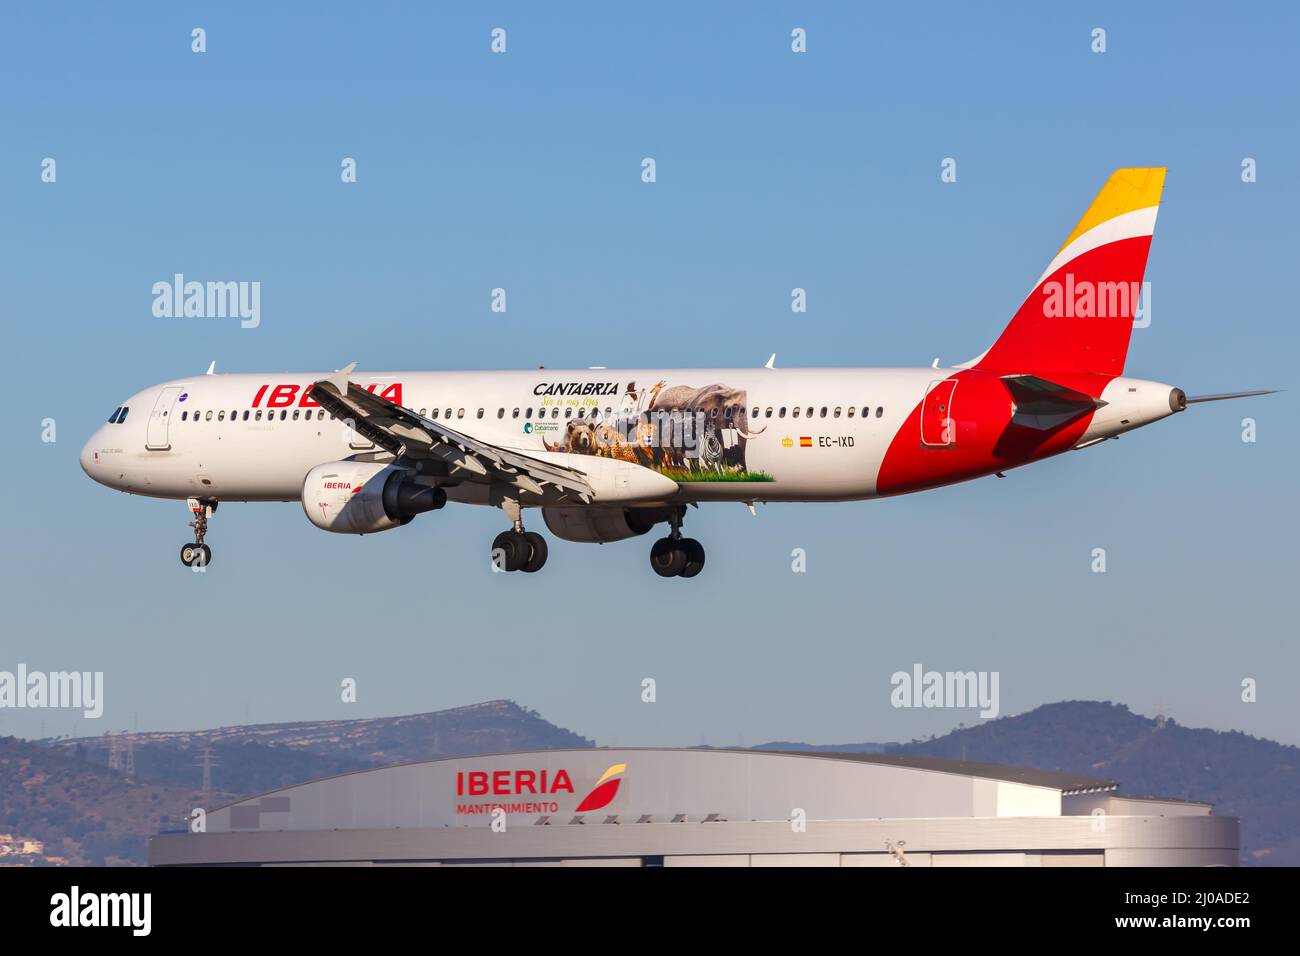 Barcelona, Spain - February 21, 2022: Iberia Airbus A321 airplane with the Cantabria special livery at Barcelona airport (BCN) in Spain. Stock Photo